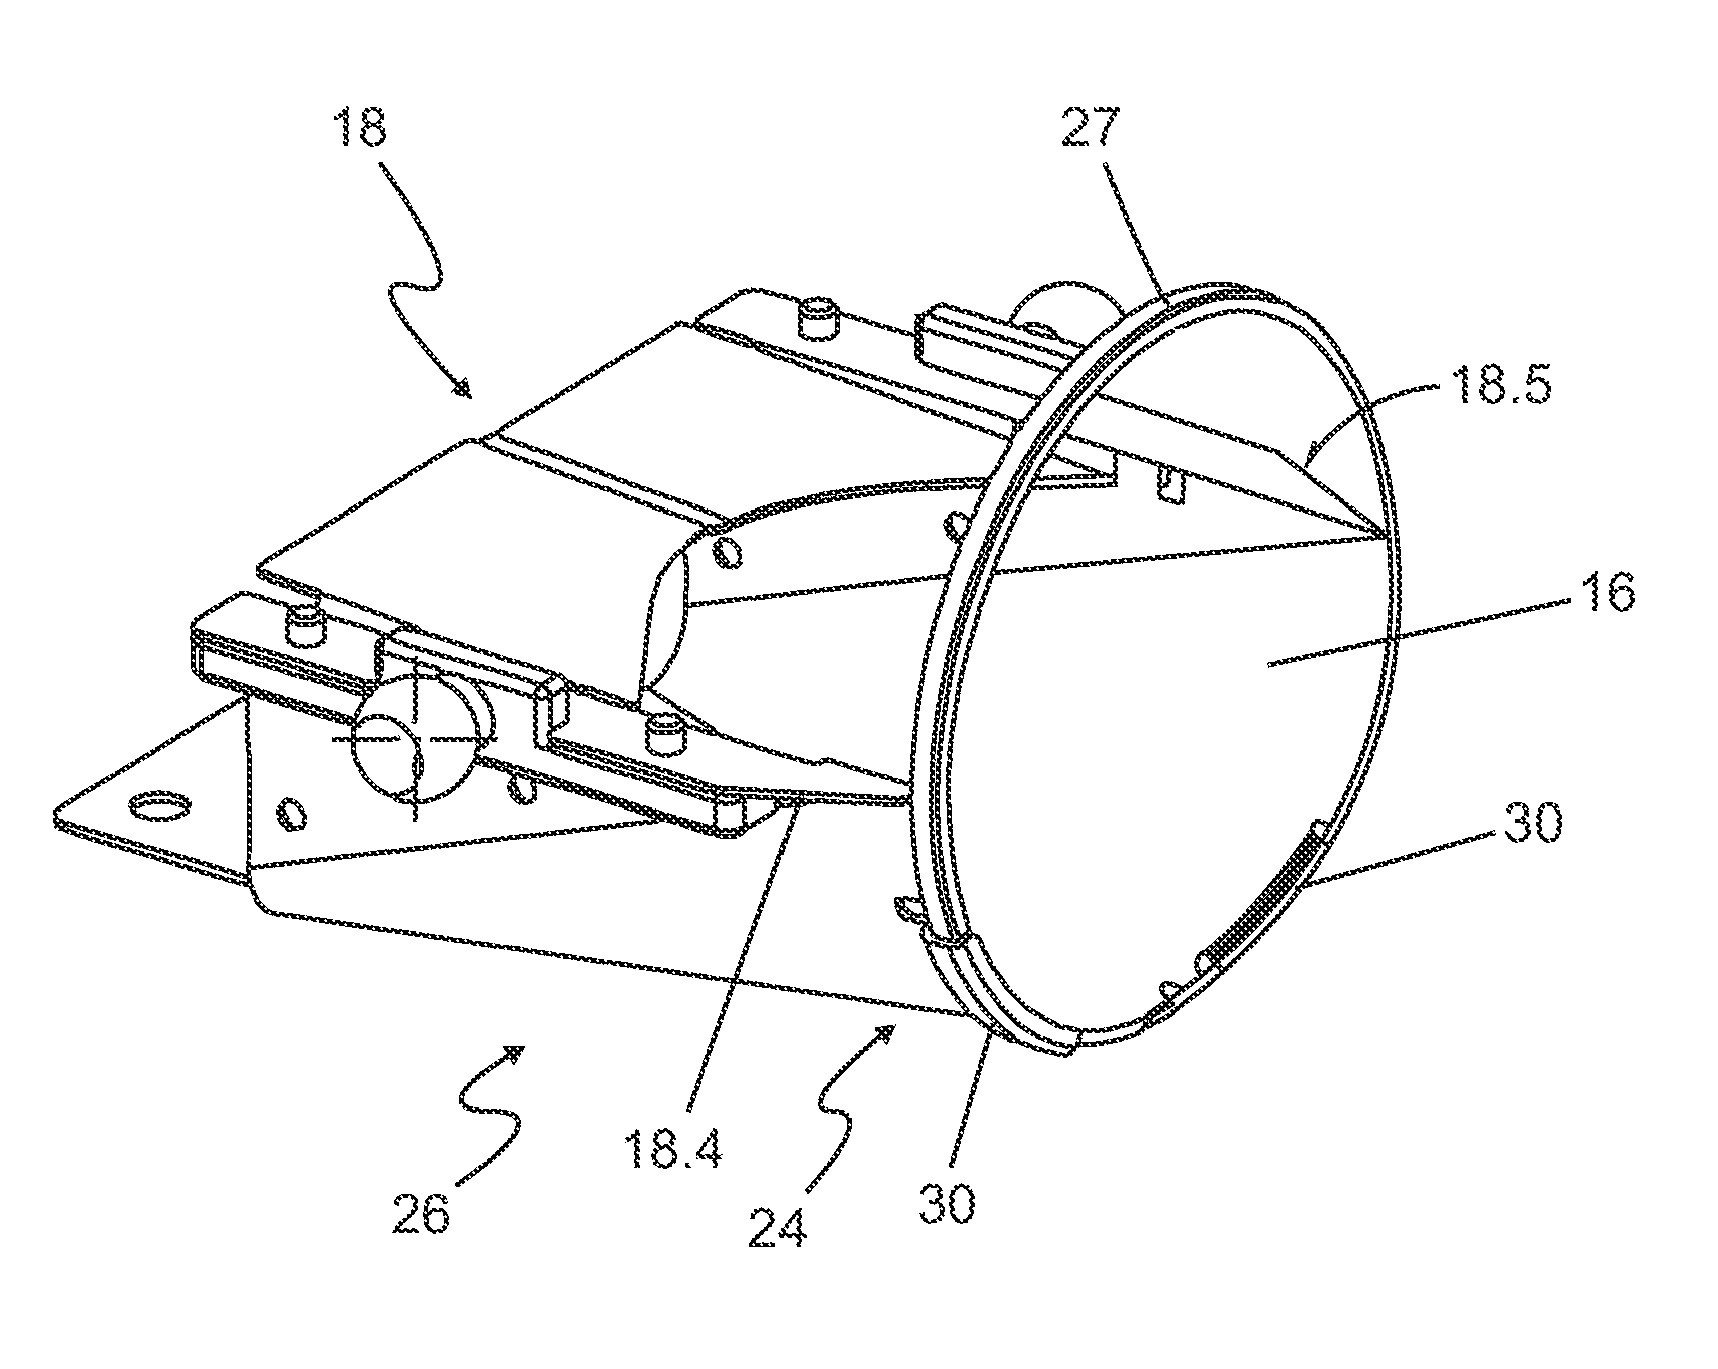 Projection light module for a motor vehicle headlamp having a central lens mount